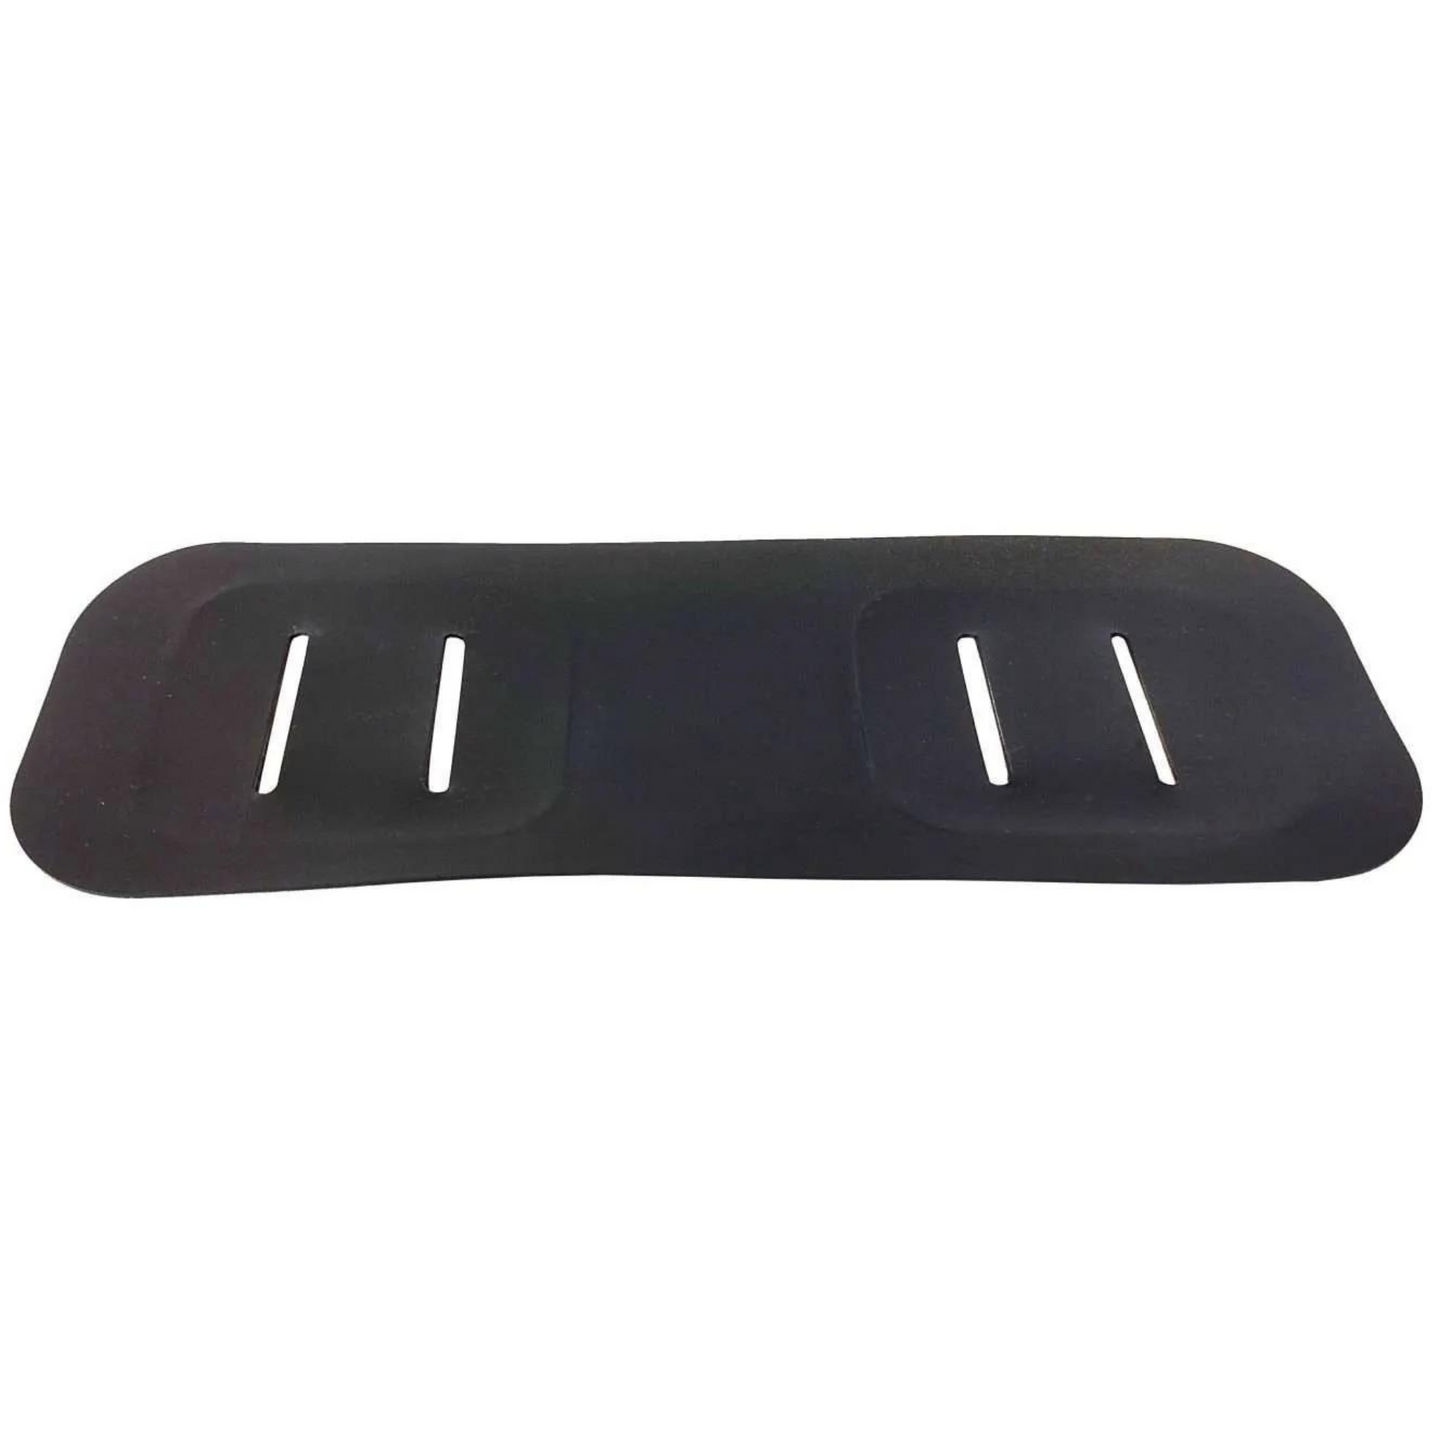 Holder for Tracking fin - pad